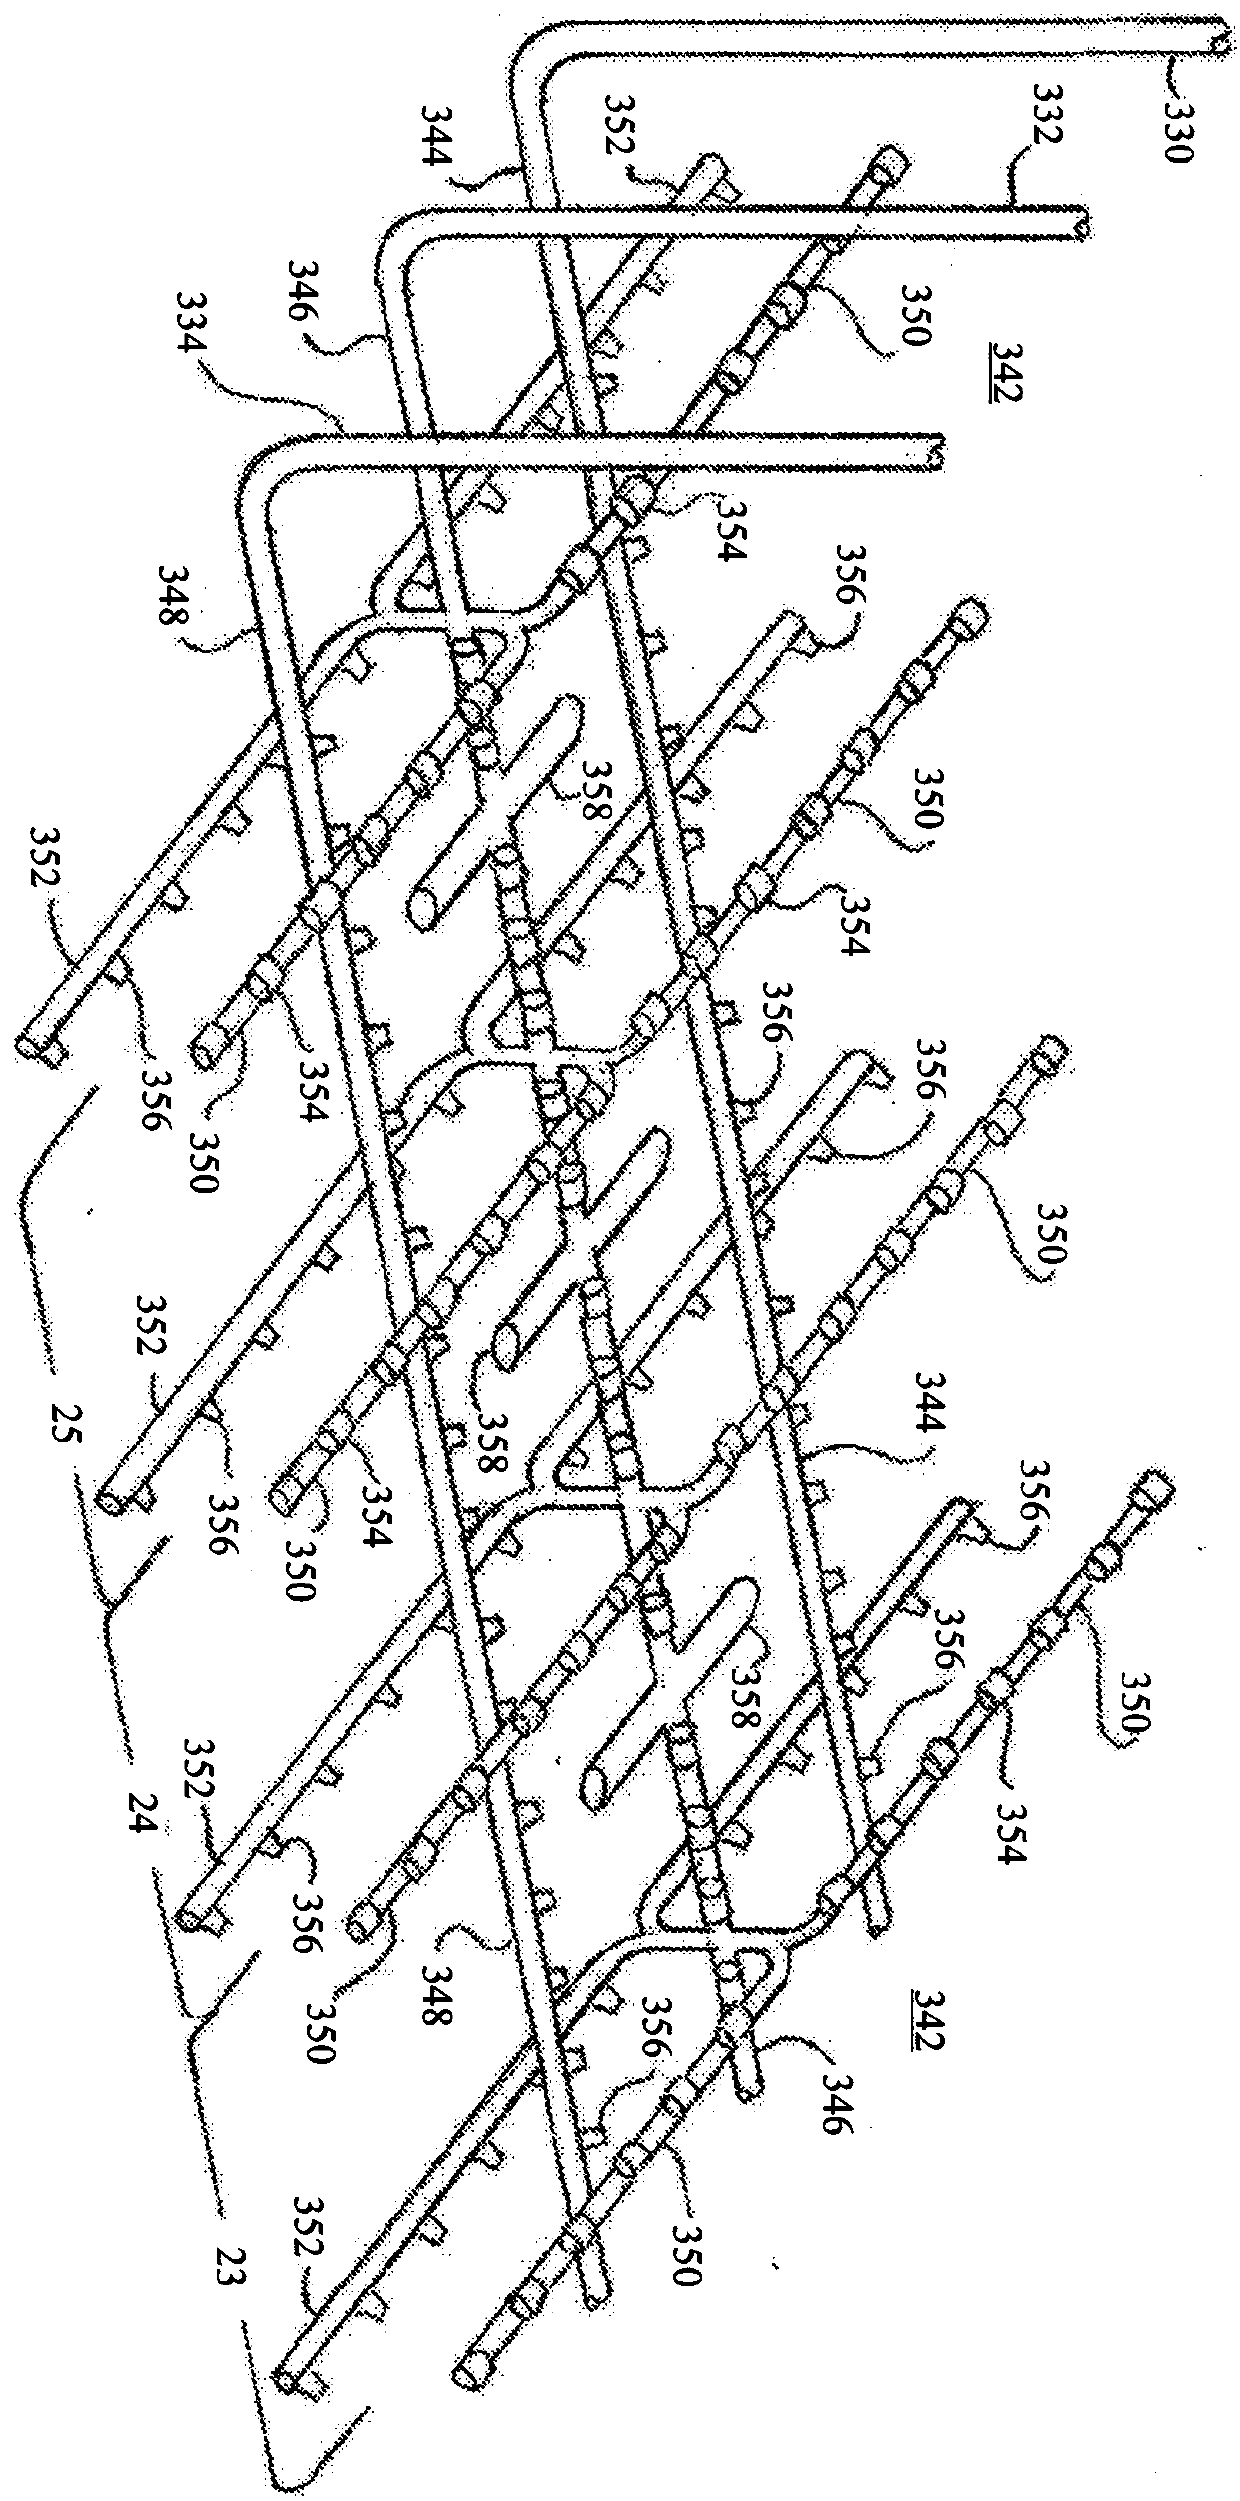 Methods and materials for evaluating and improving production of geo-specific shale reservoirs